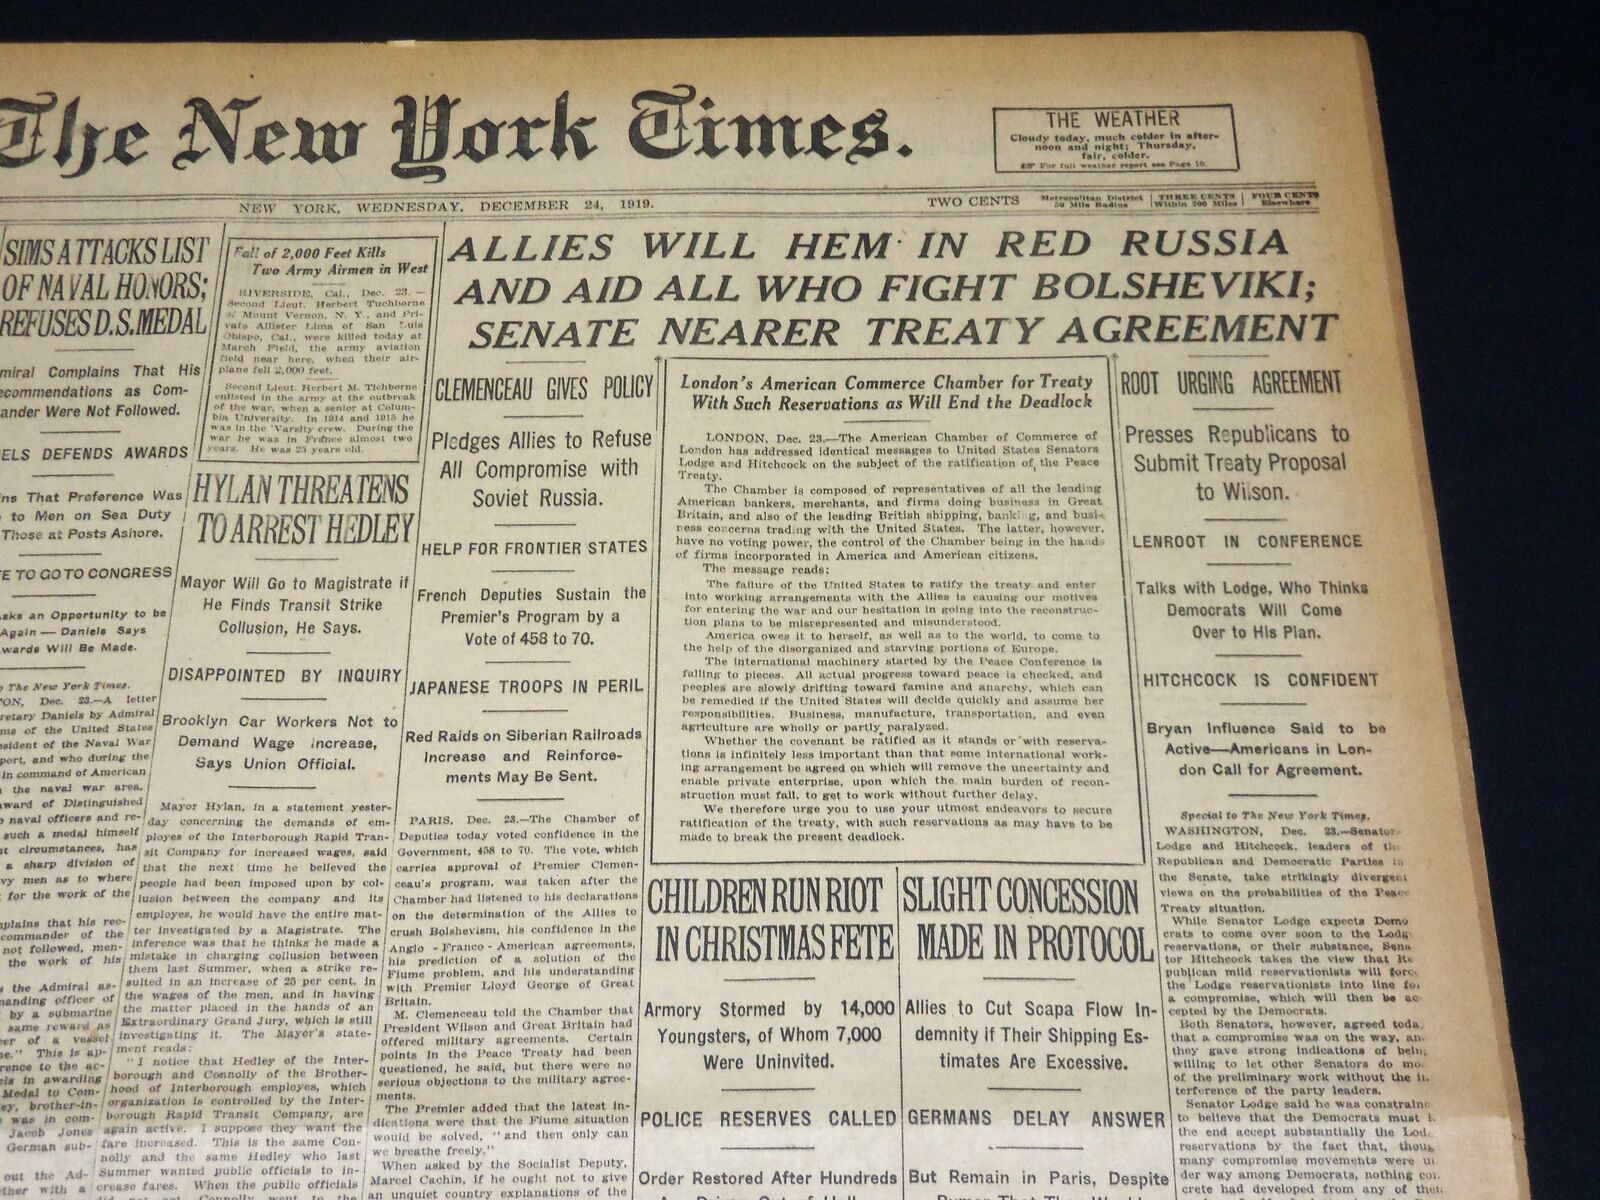 1919 DECEMBER 24 NEW YORK TIMES - ALLIES WILL HEM IN RED RUSSIA - NT 8533